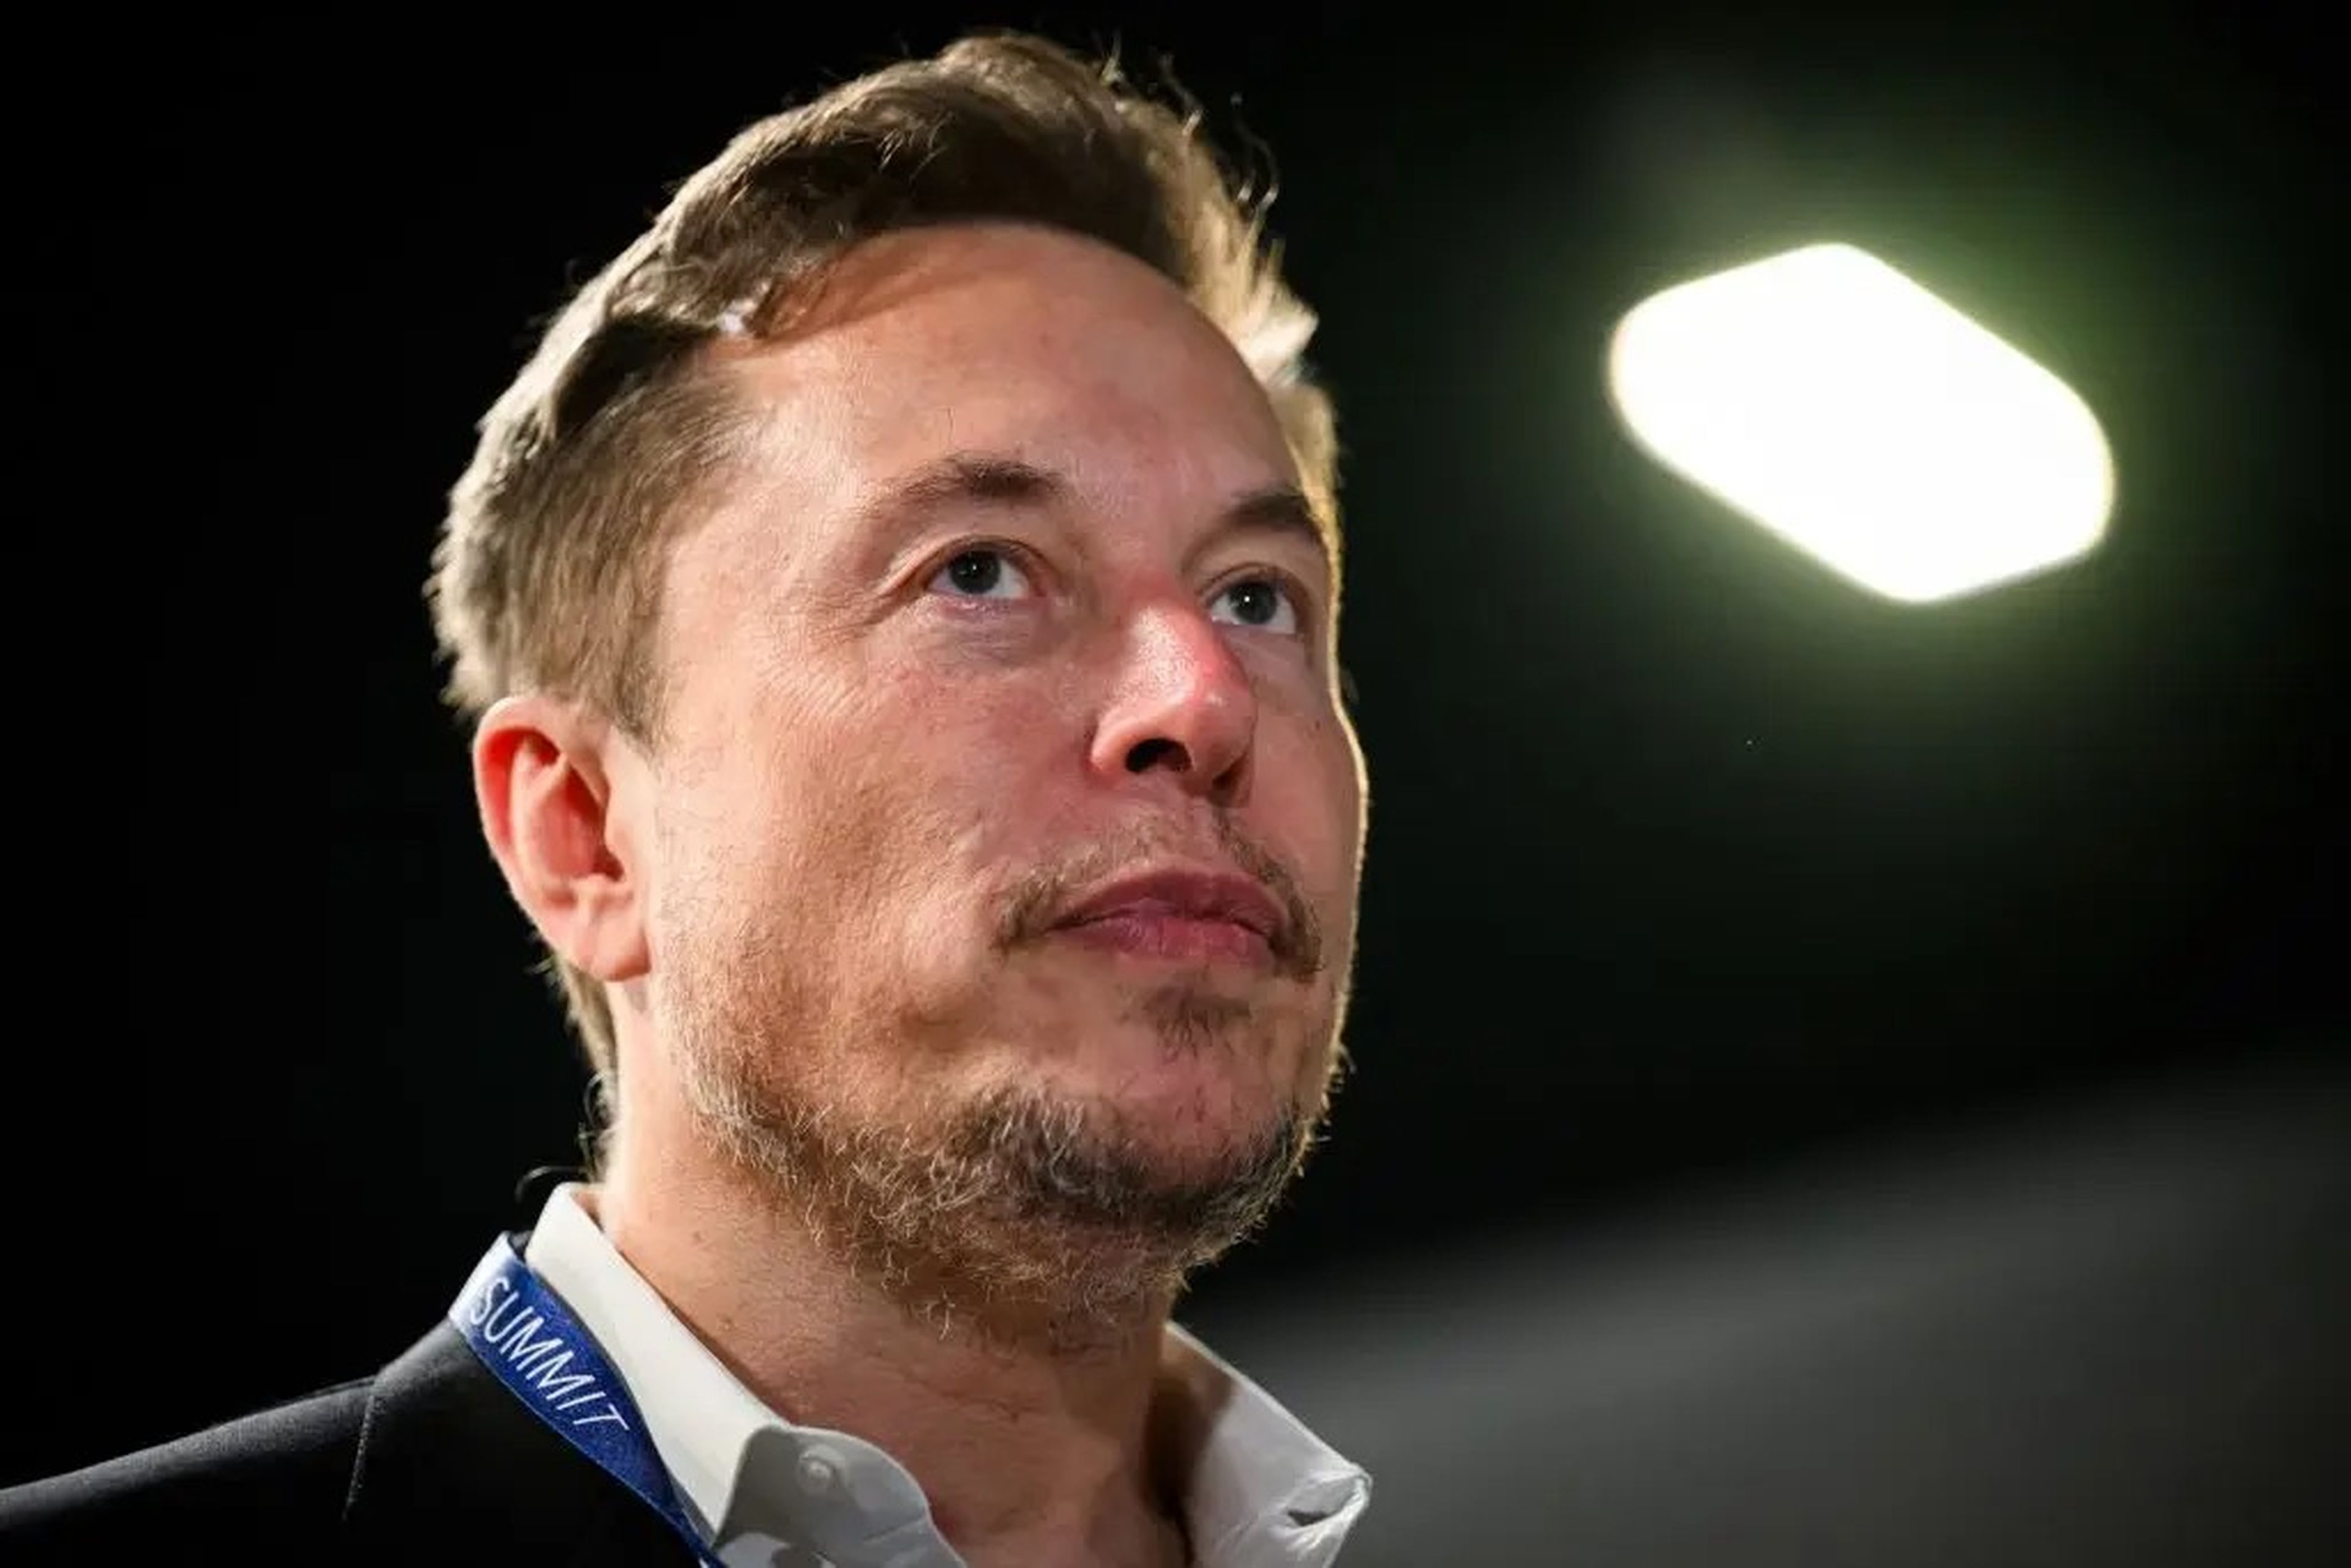 Elon Musk prefers job candidates who have 'never been laid off no matter the reason' X recruiter says.